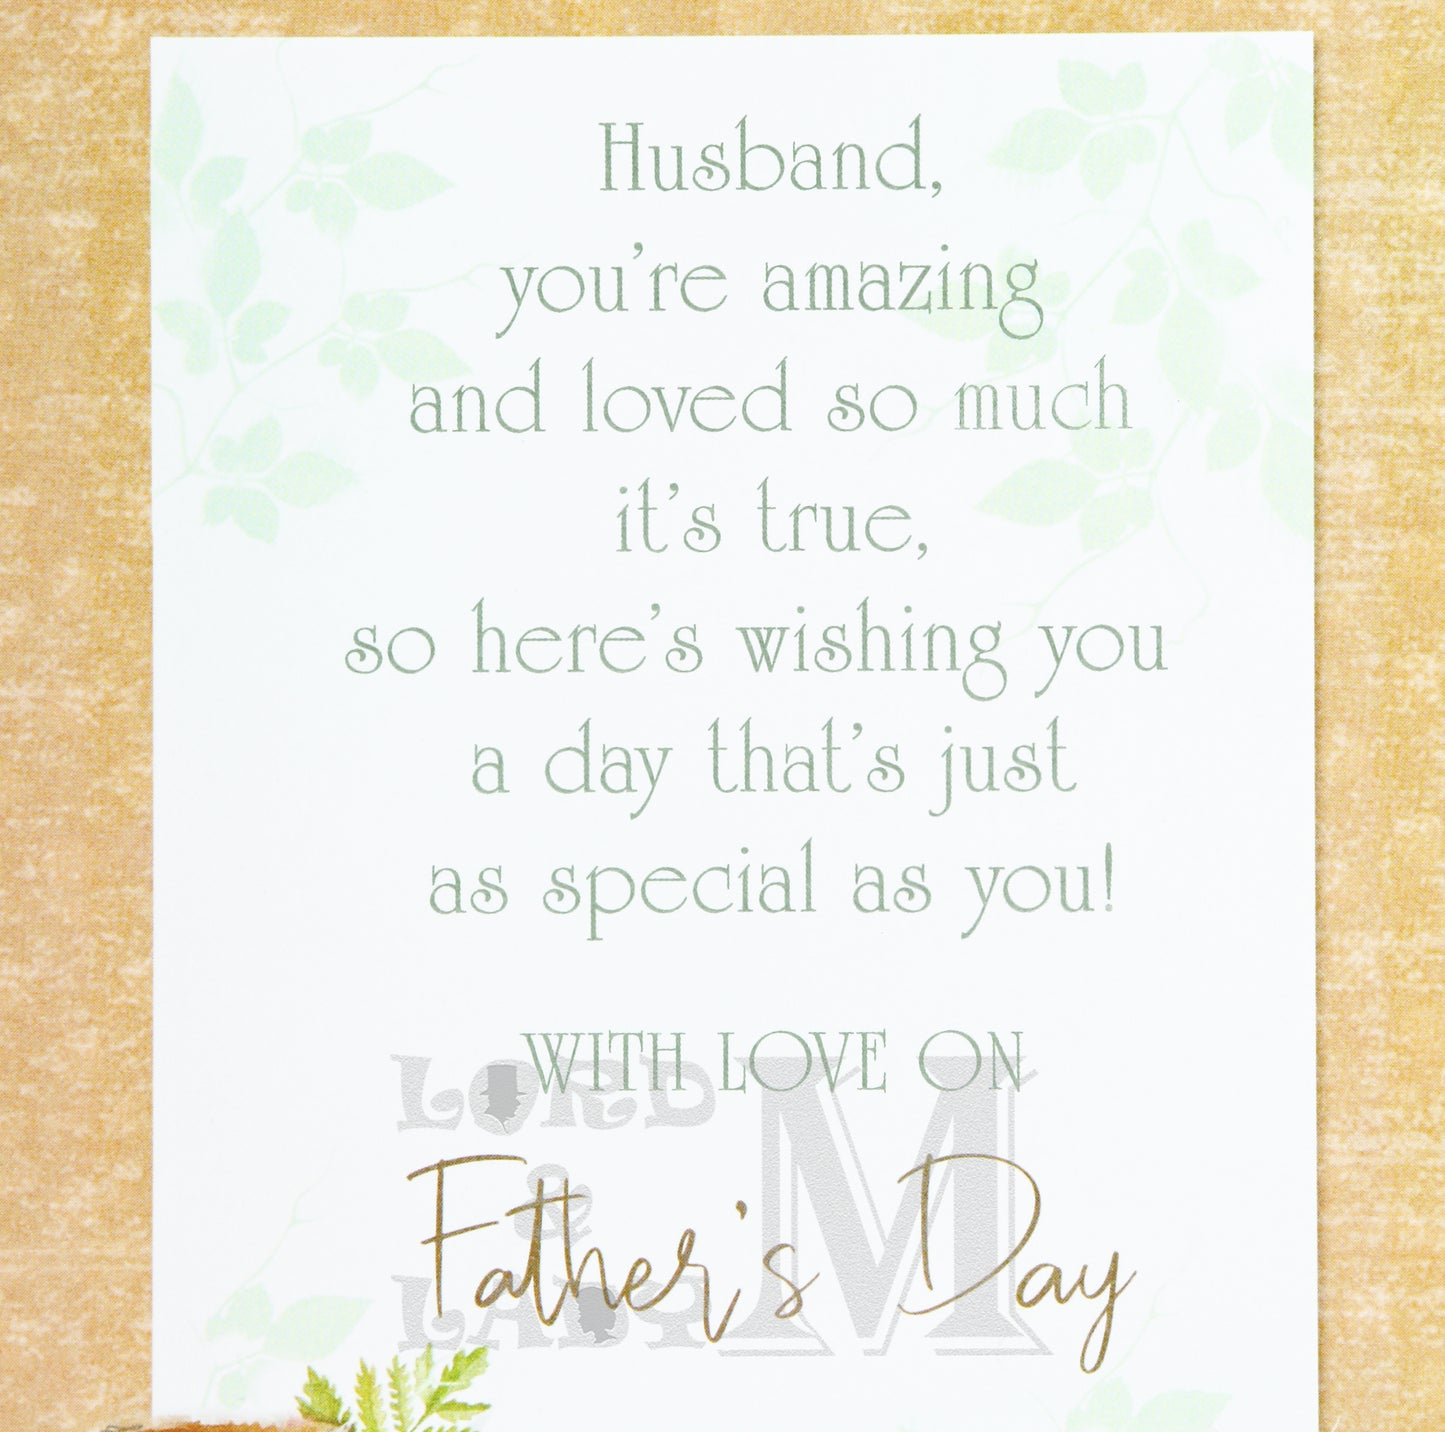 19cm - Father's Day Wishes To A Special Husband -J